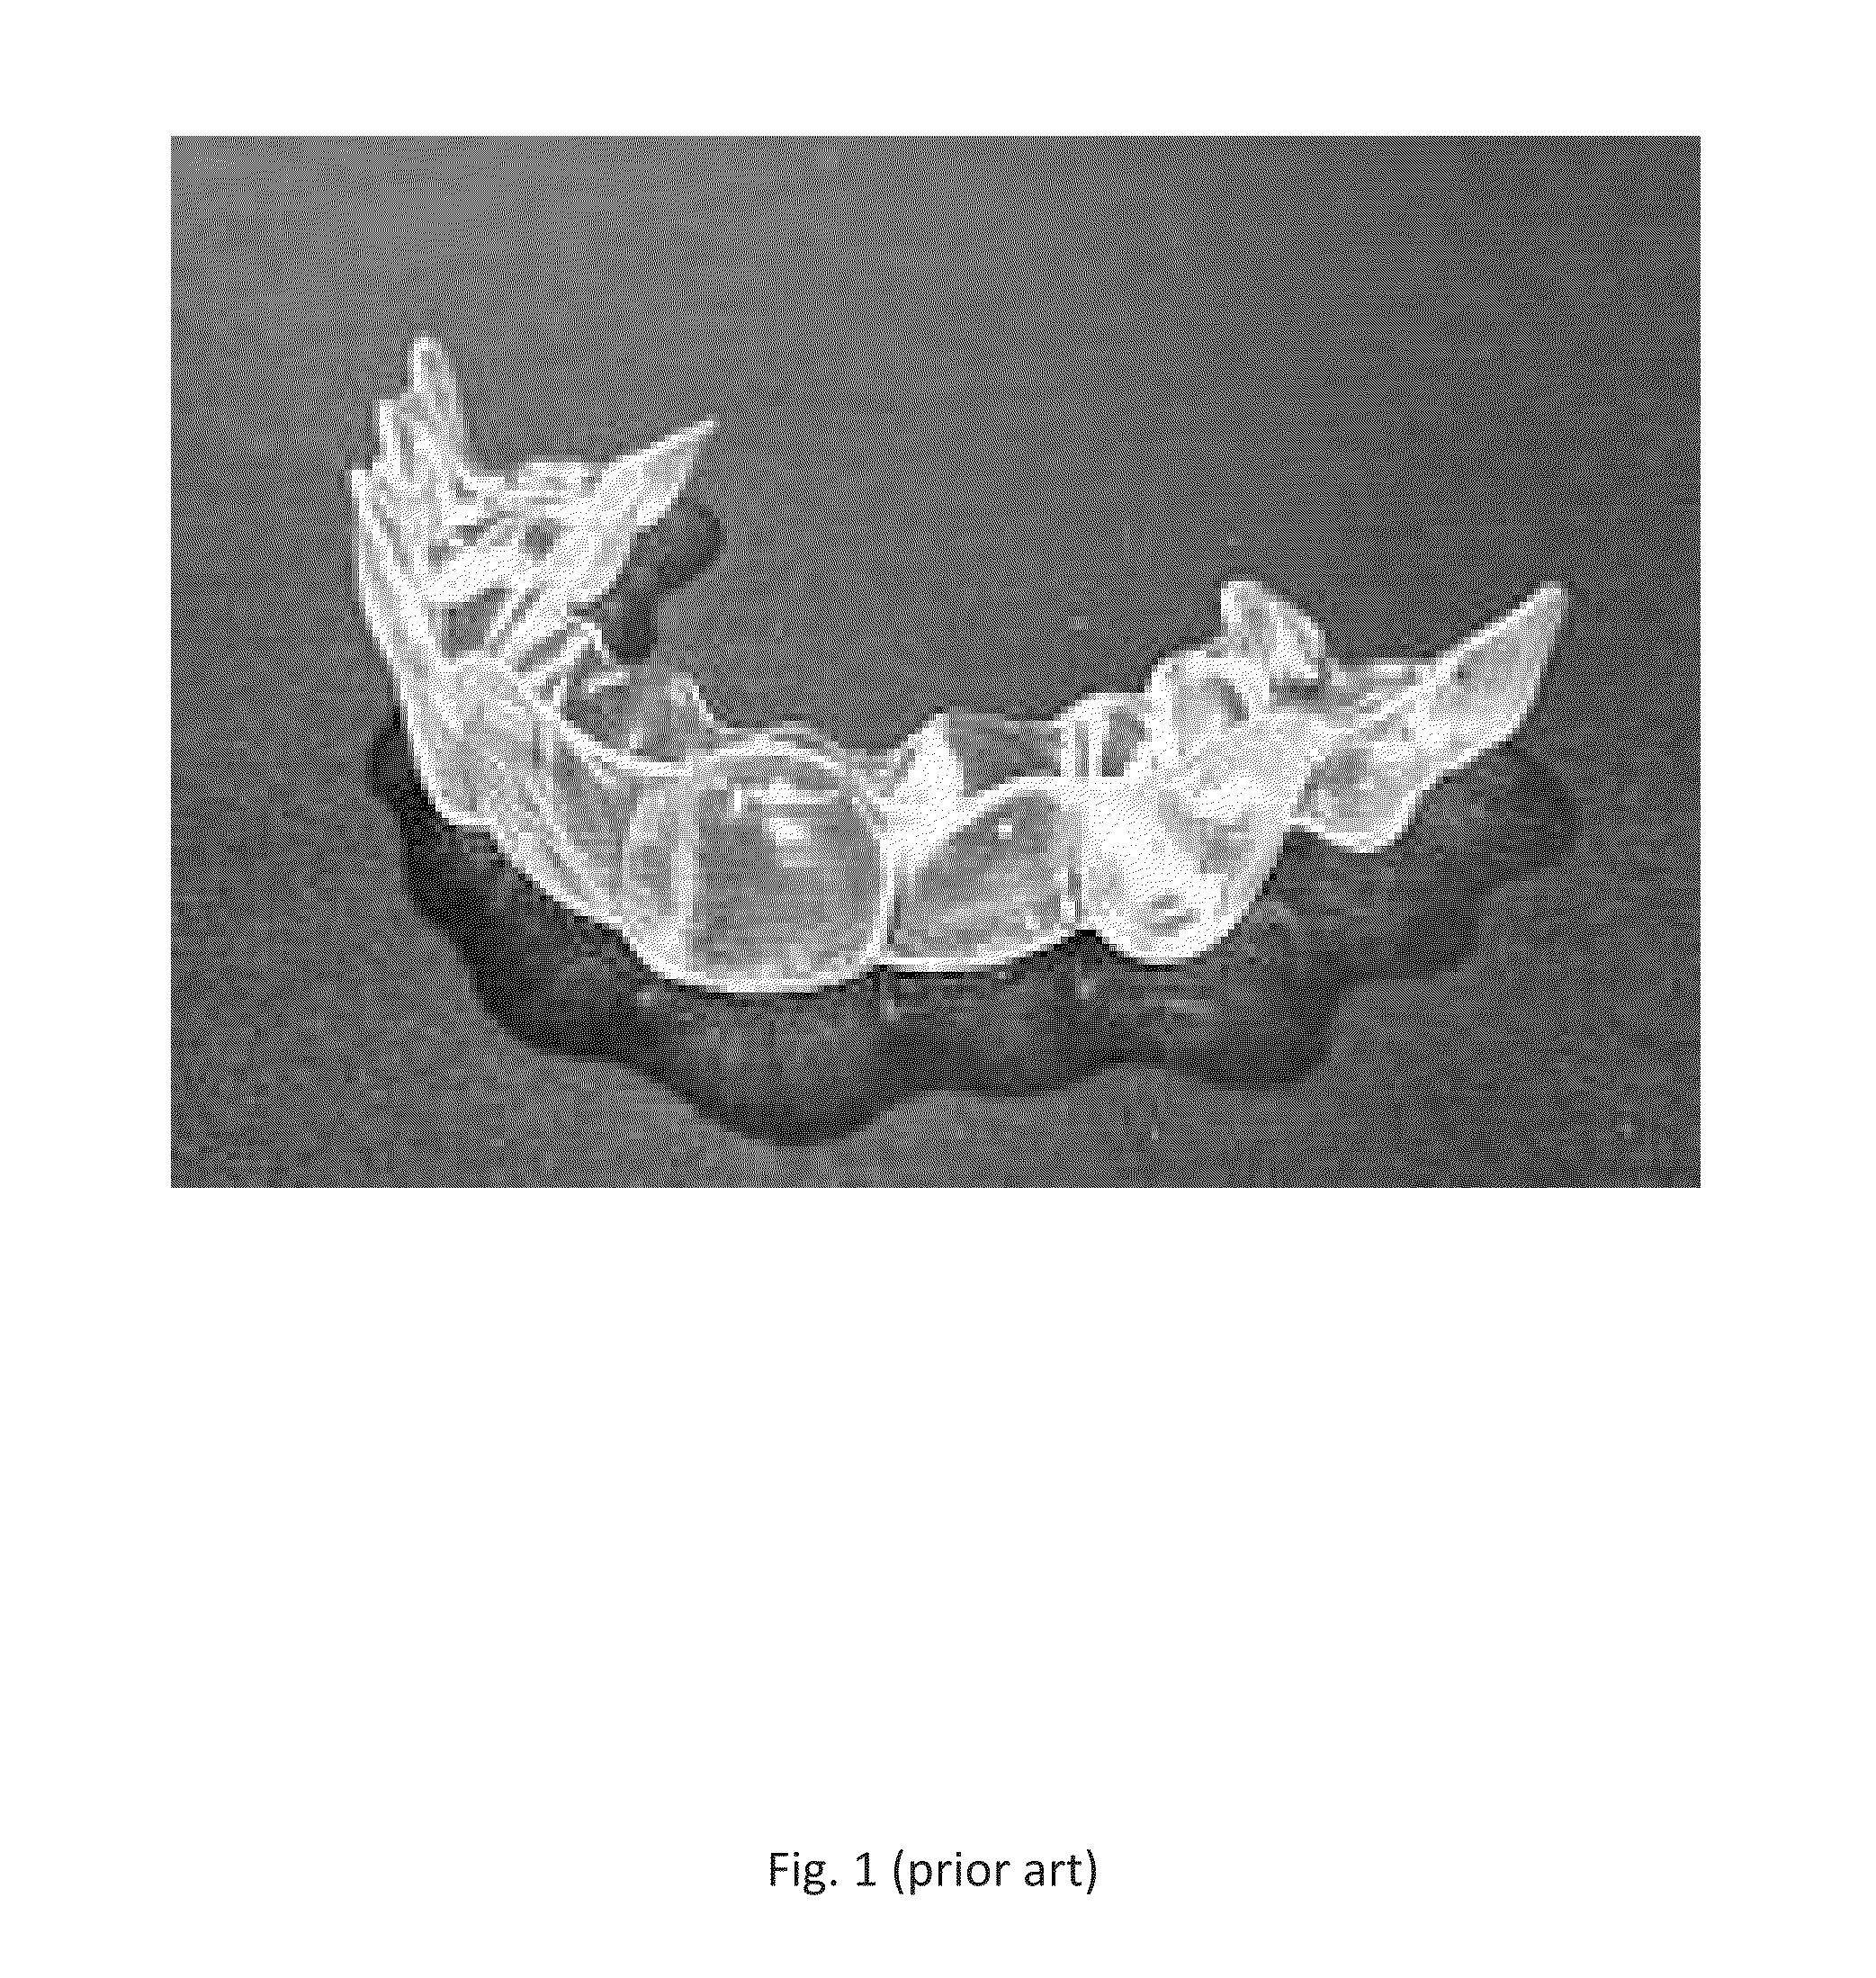 Method for Making and Using Aligners for Orthodontic Treatments